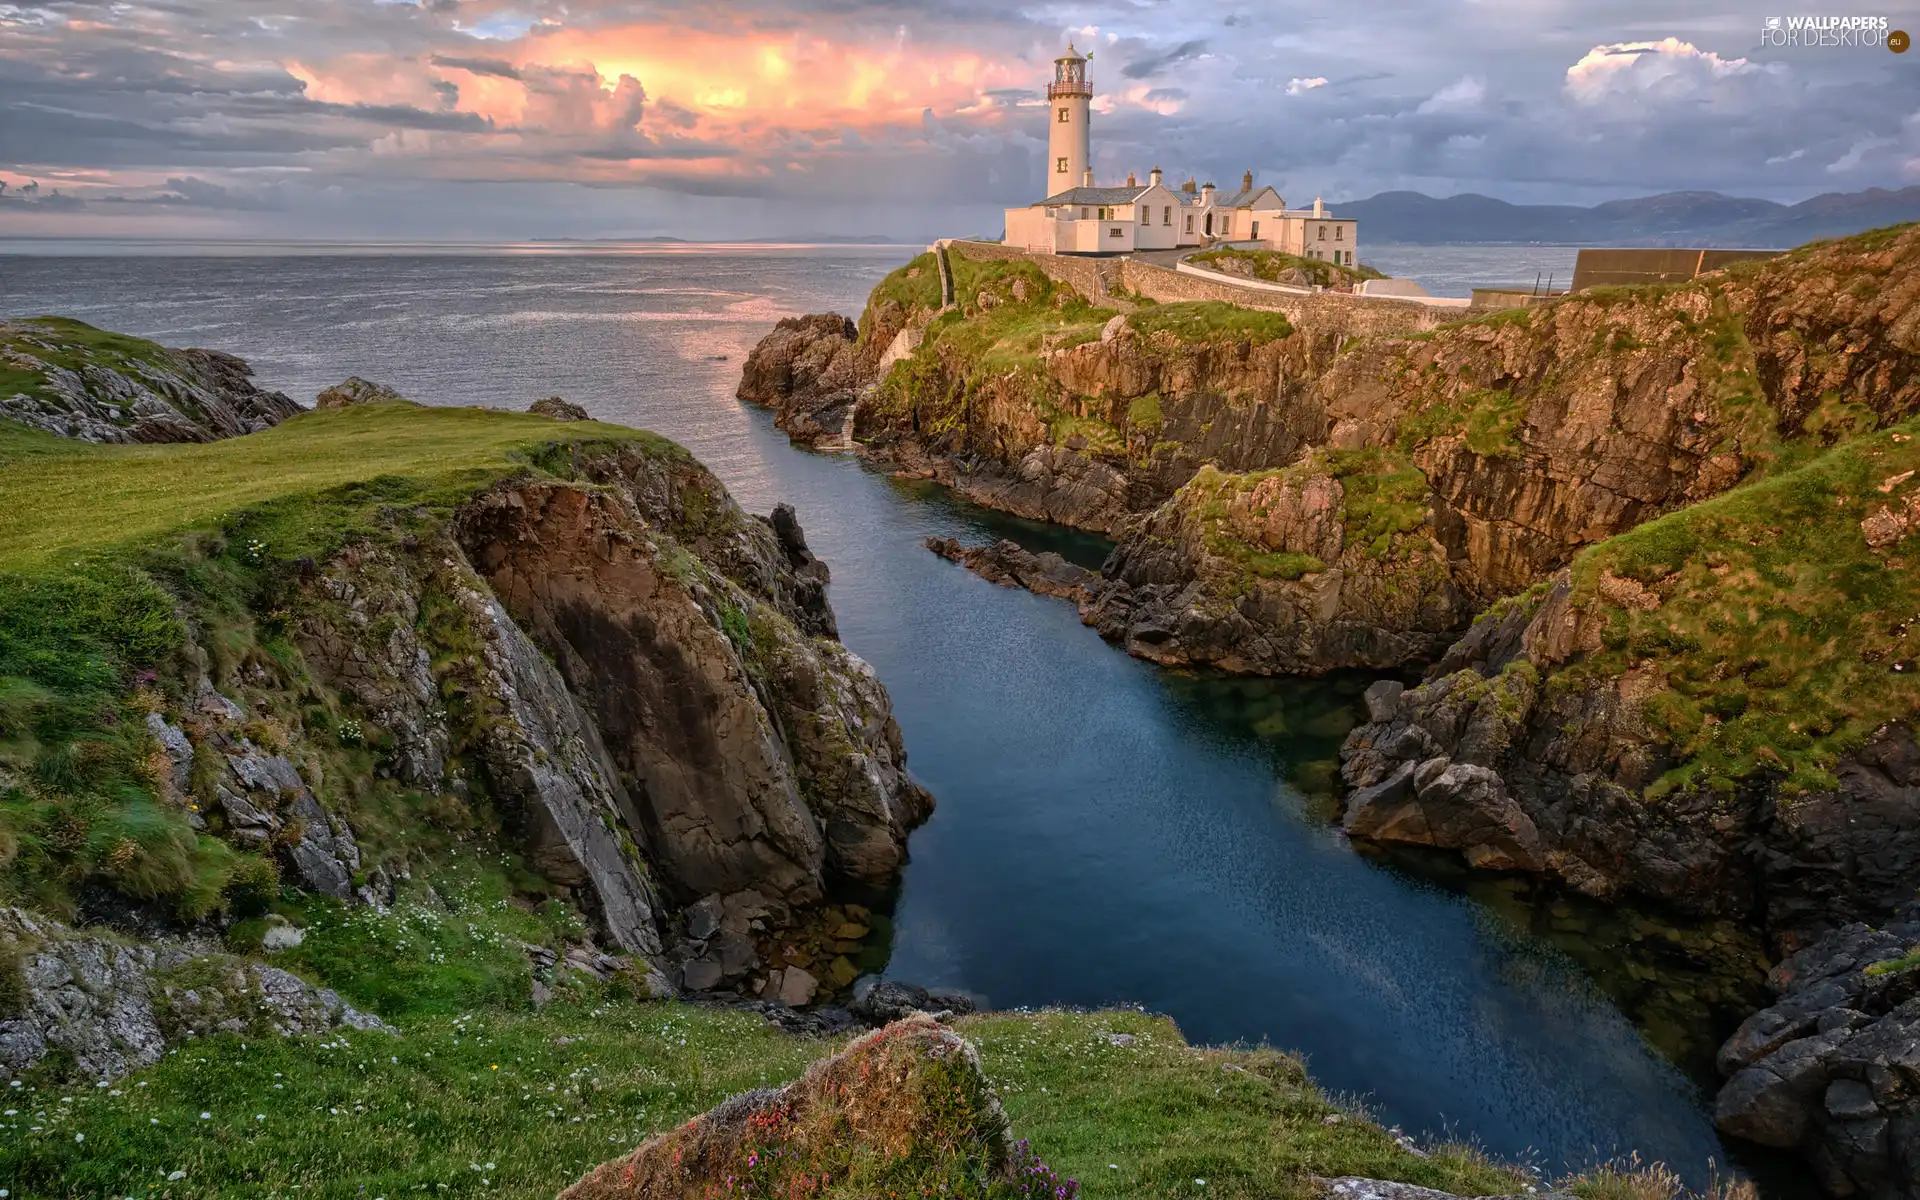 rocks, clouds, Ireland, Great Sunsets, County Donegal, Fanad Head Lighthouse, Lighthouses, Portsalon